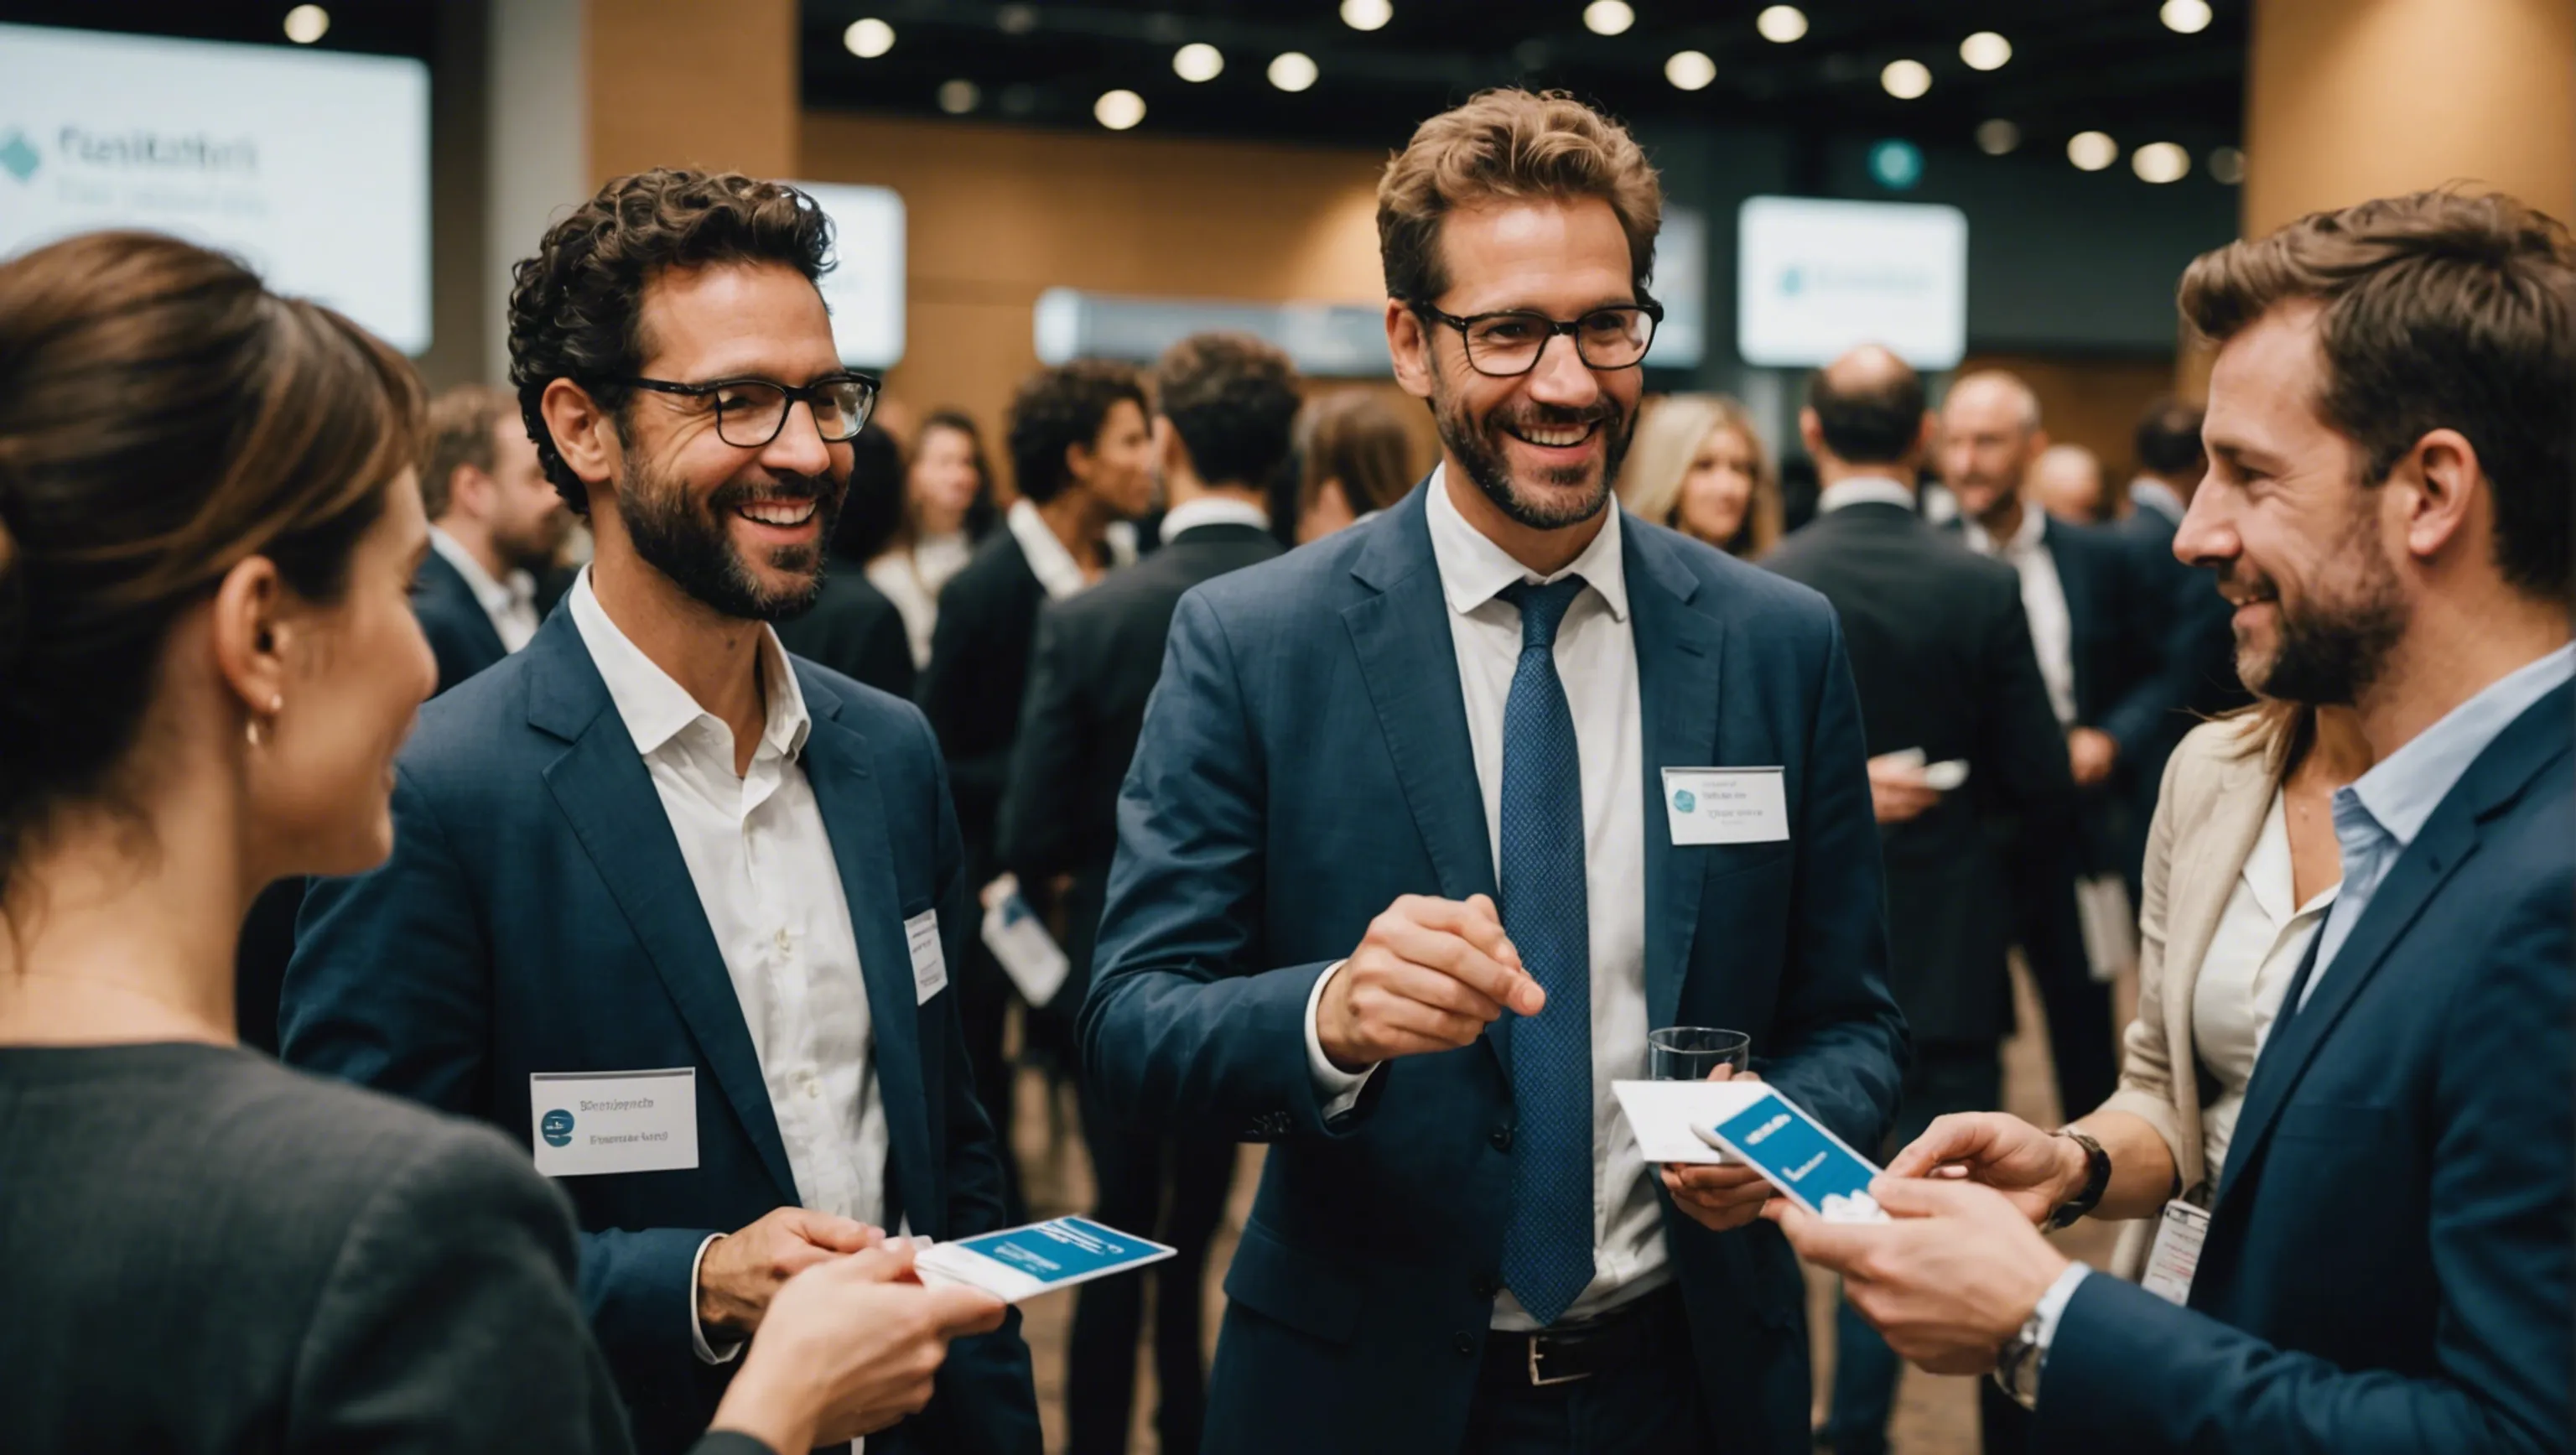 Networking at Industry Events